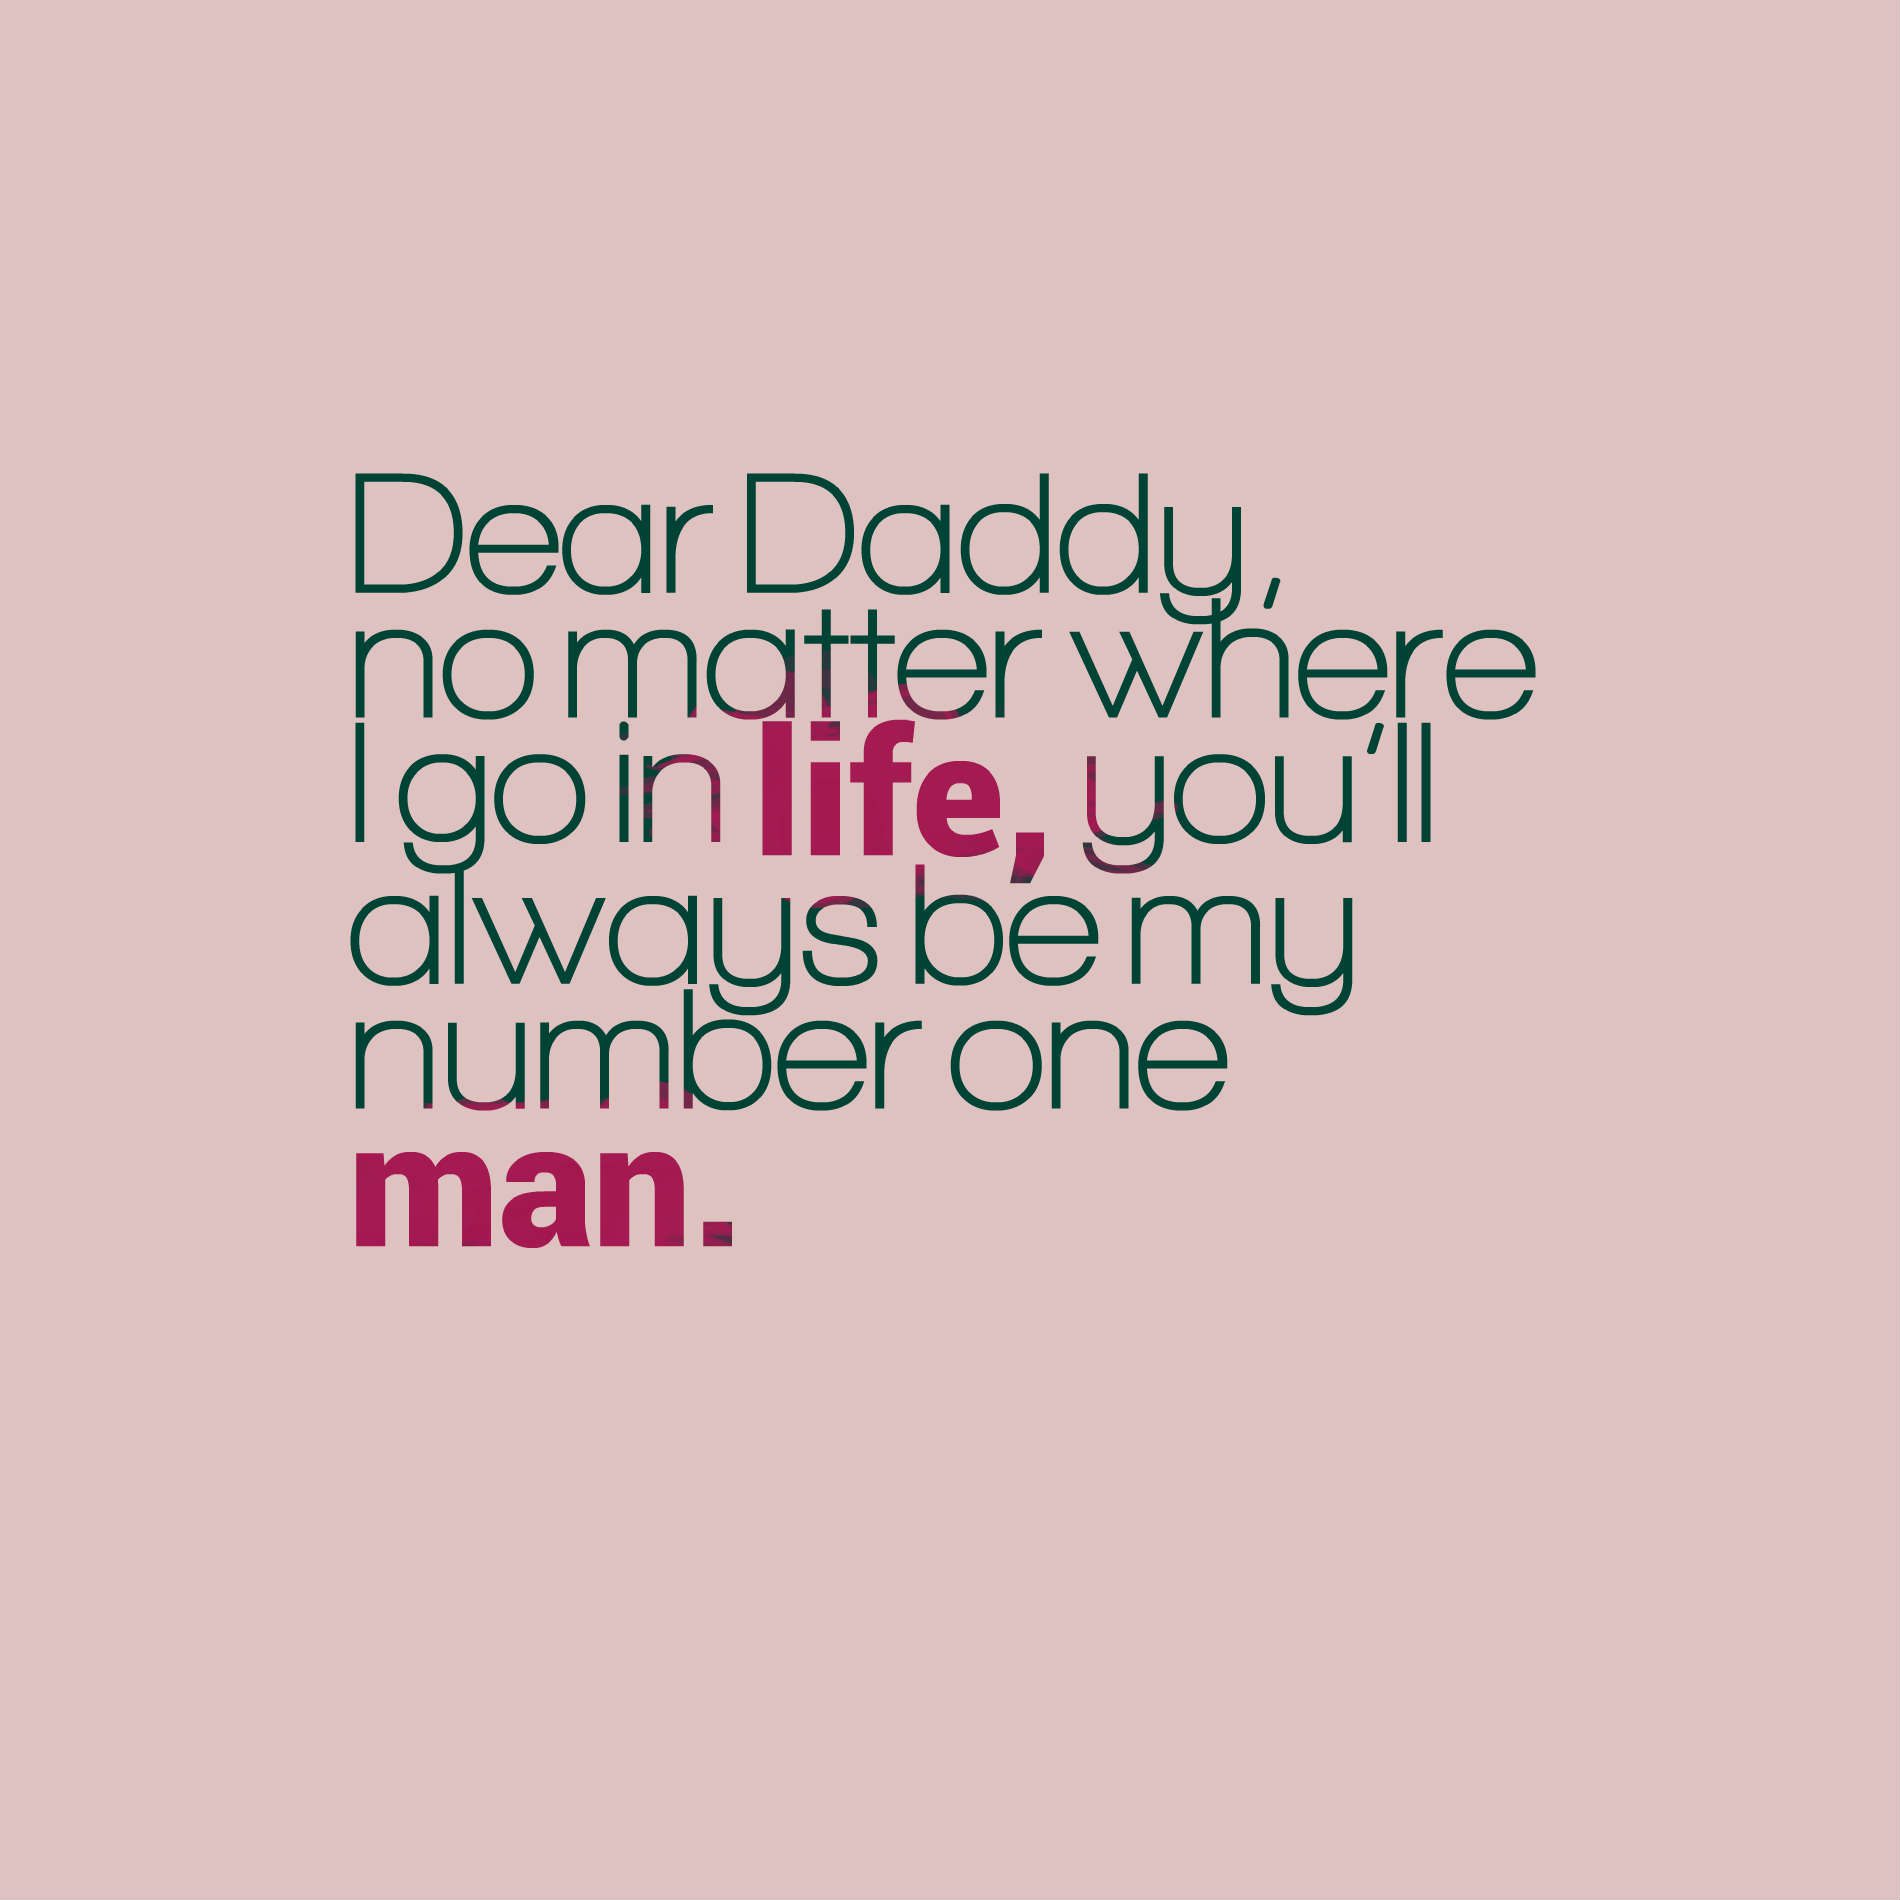 Dear Daddy, no matter where I go in life, you’ll always be my number one man.